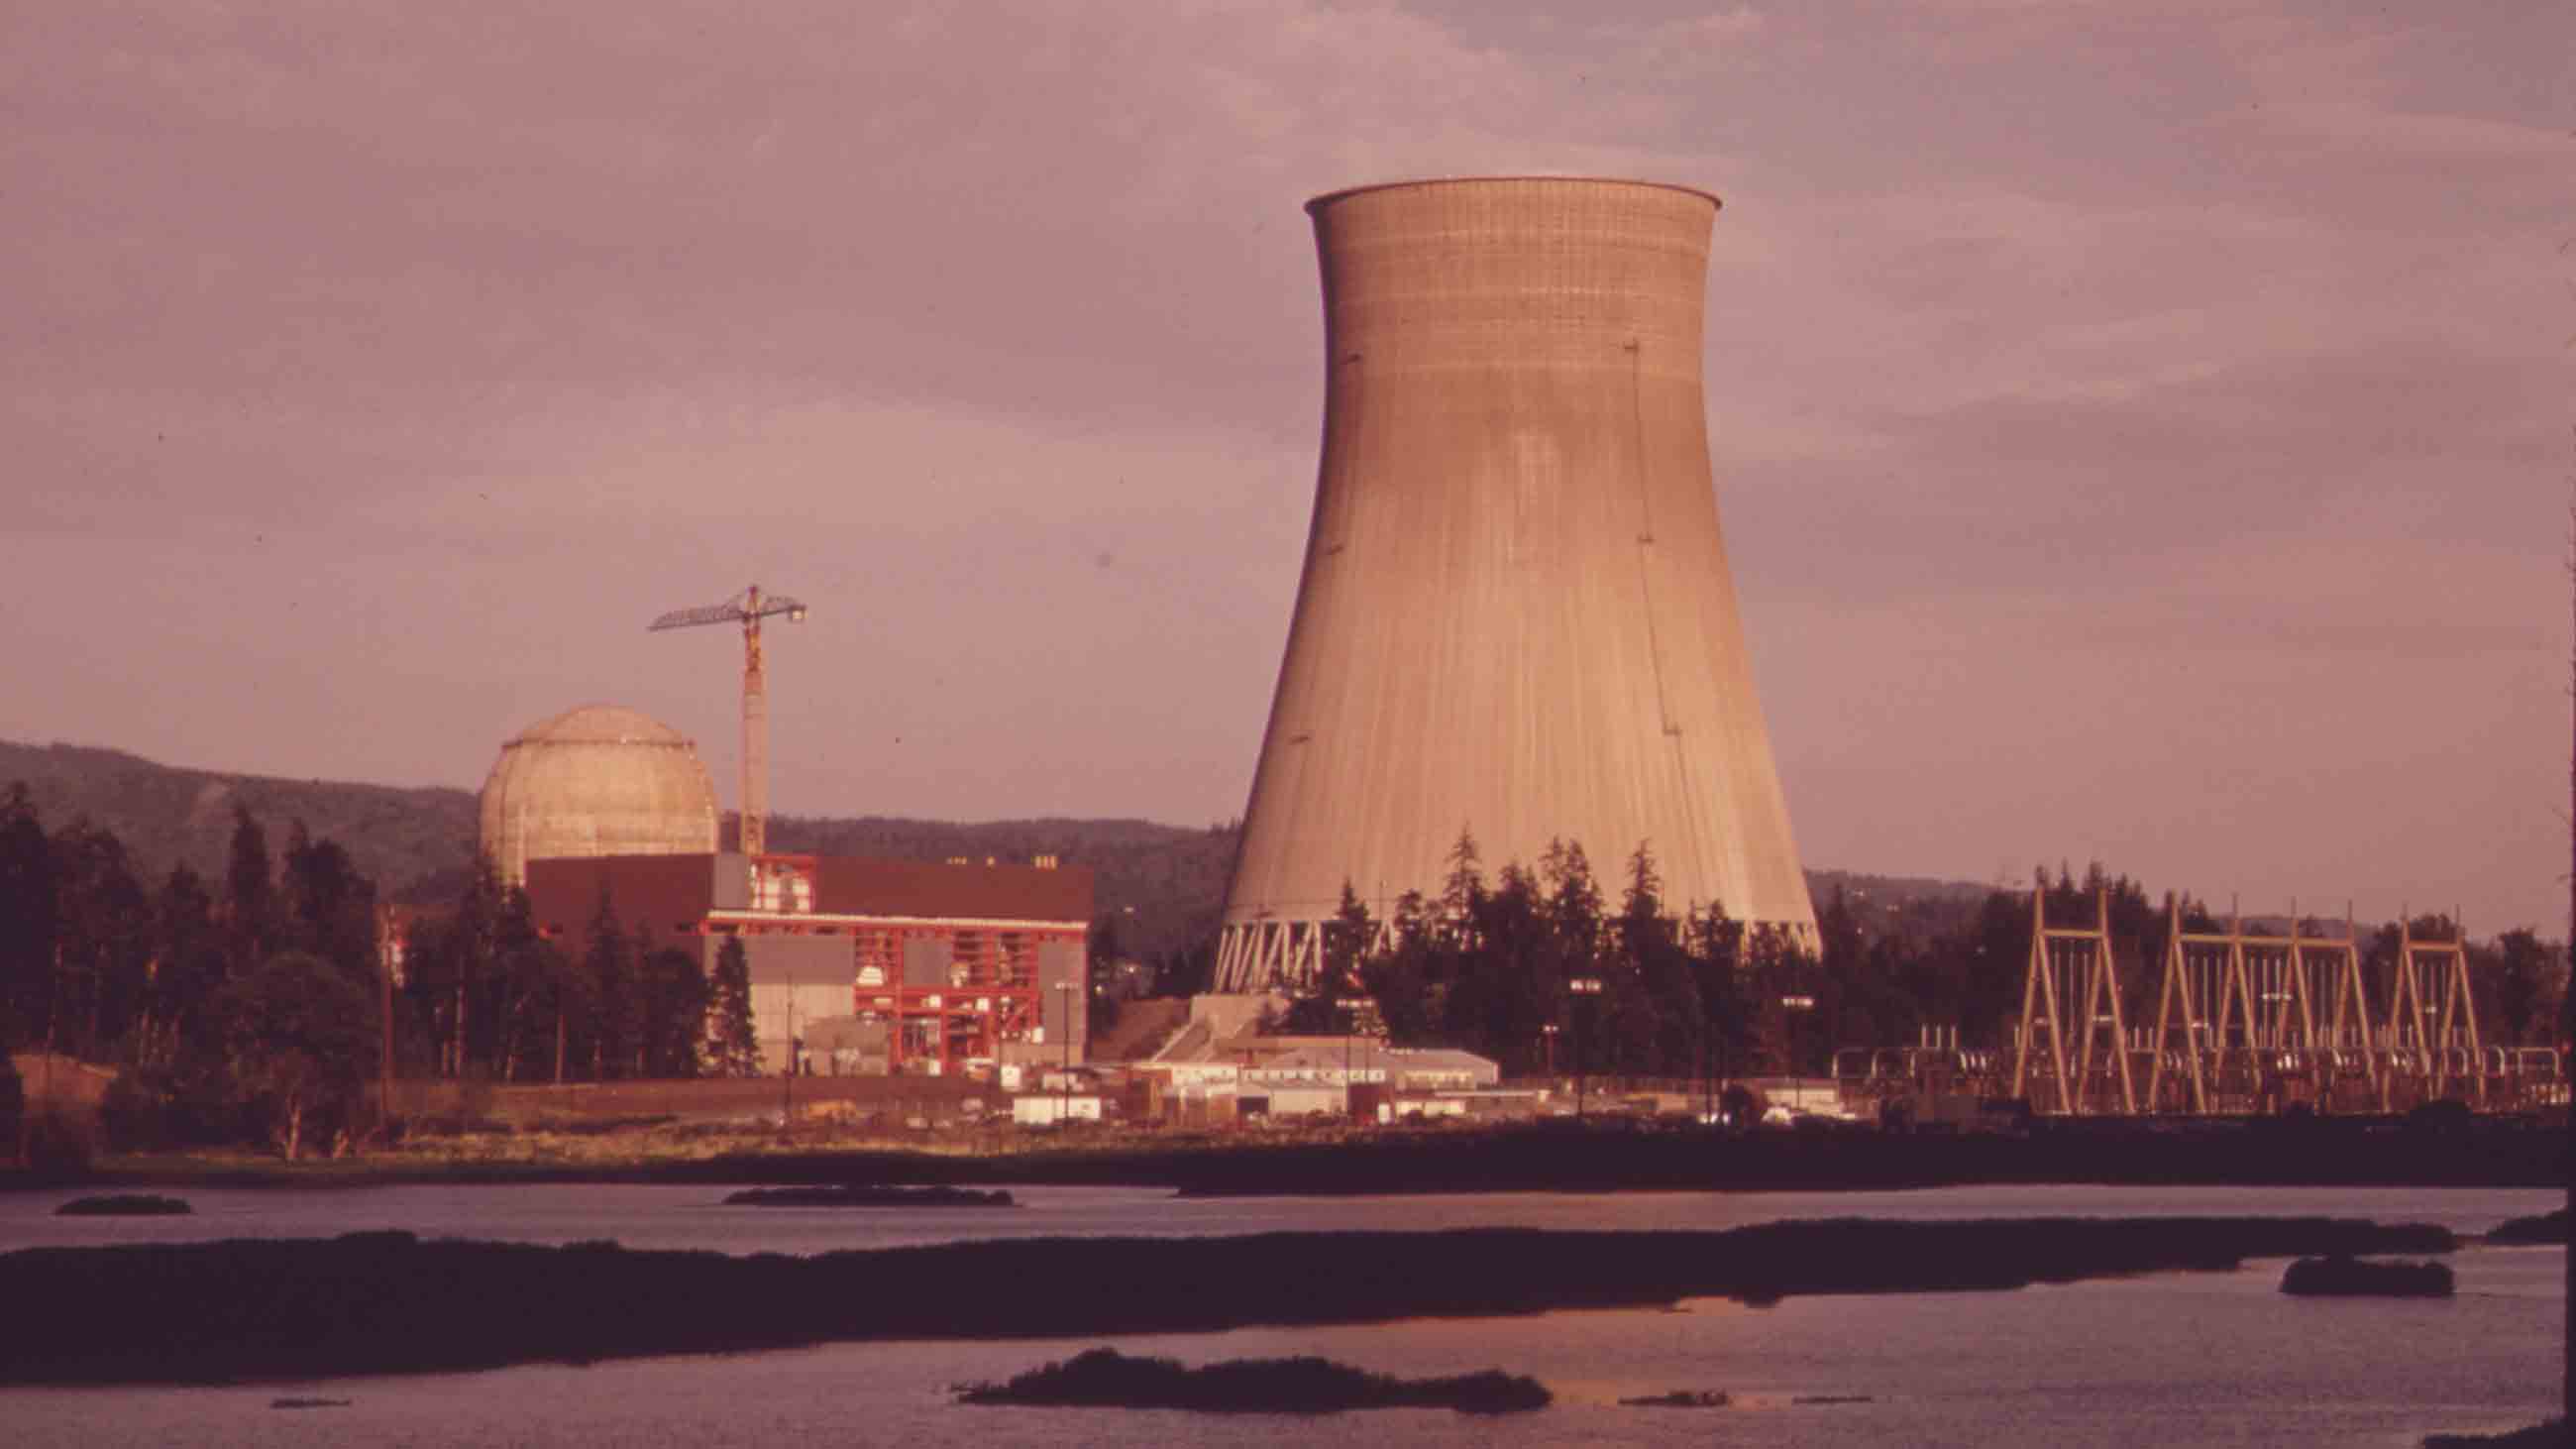 In the debate over nuclear power, experts accused the public of being “irrational,” “mistaken,” and “insane.”